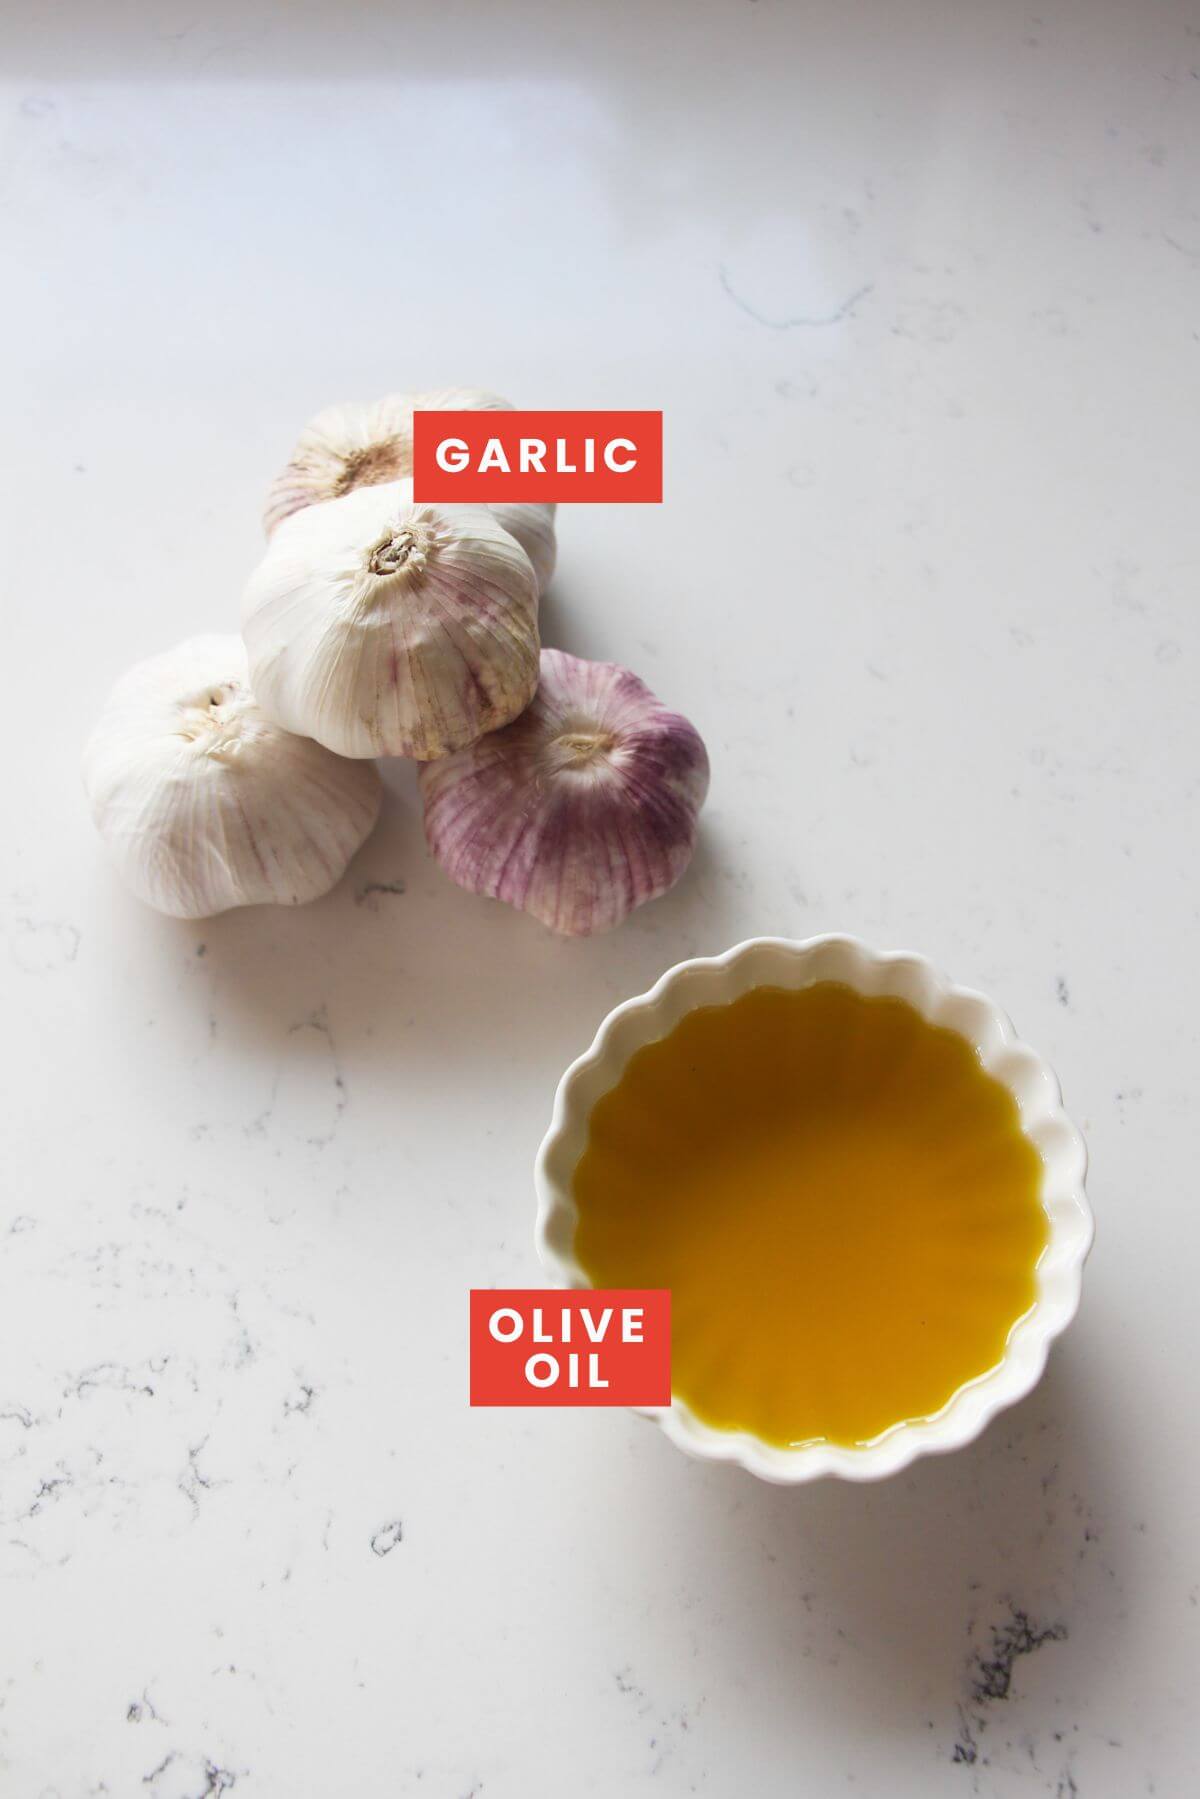 Ingredients for confit garlic laid out on a white marble background and labelled.